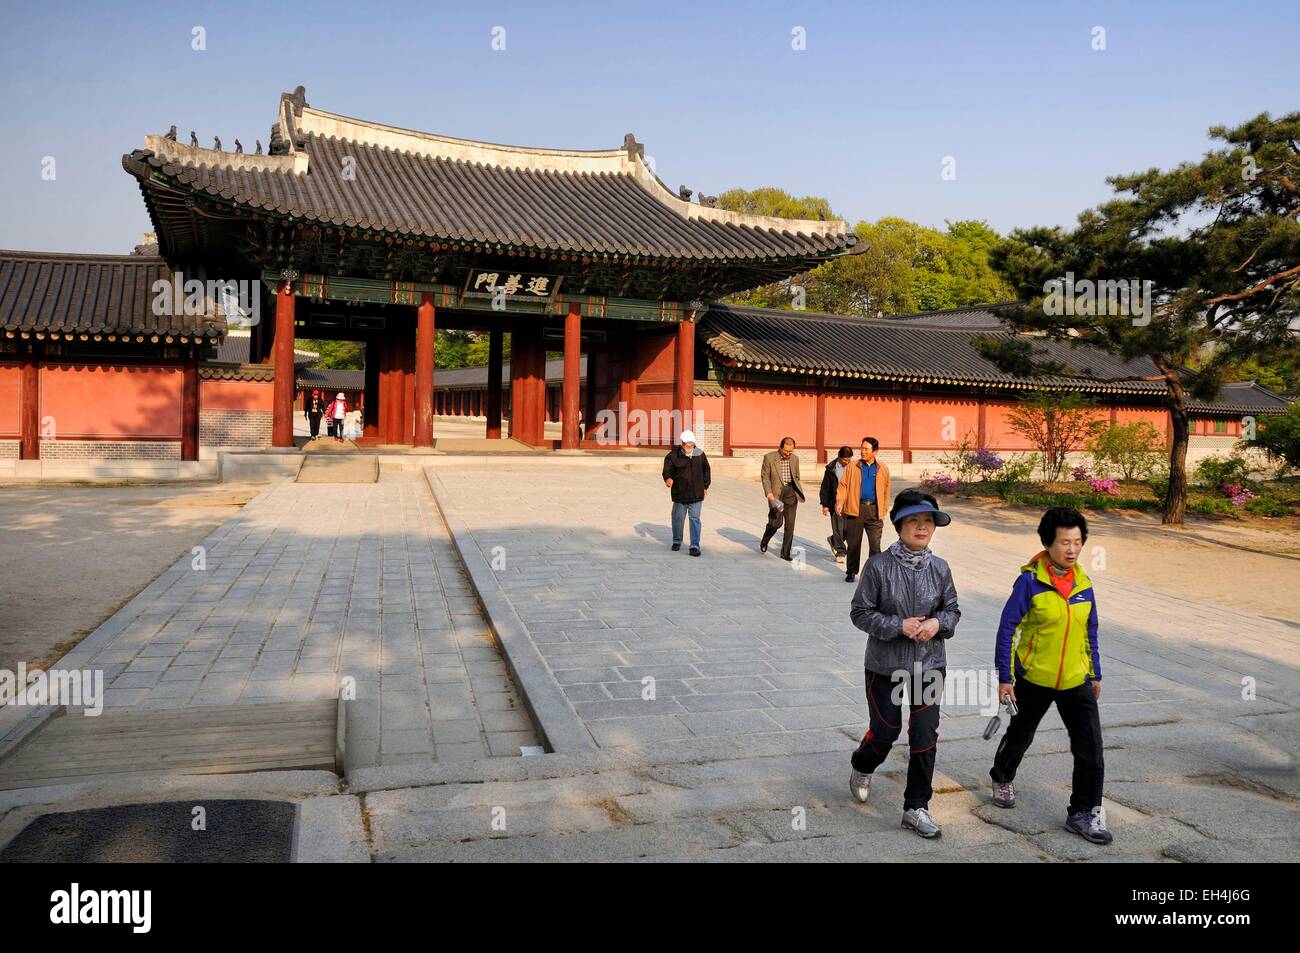 South Korea, Seoul, Korean women at Changdeokgung Palace (Prospering Virtue Palace) built by the kings of the Joseon Dynasty, listed as World Heritage by UNESCO Stock Photo